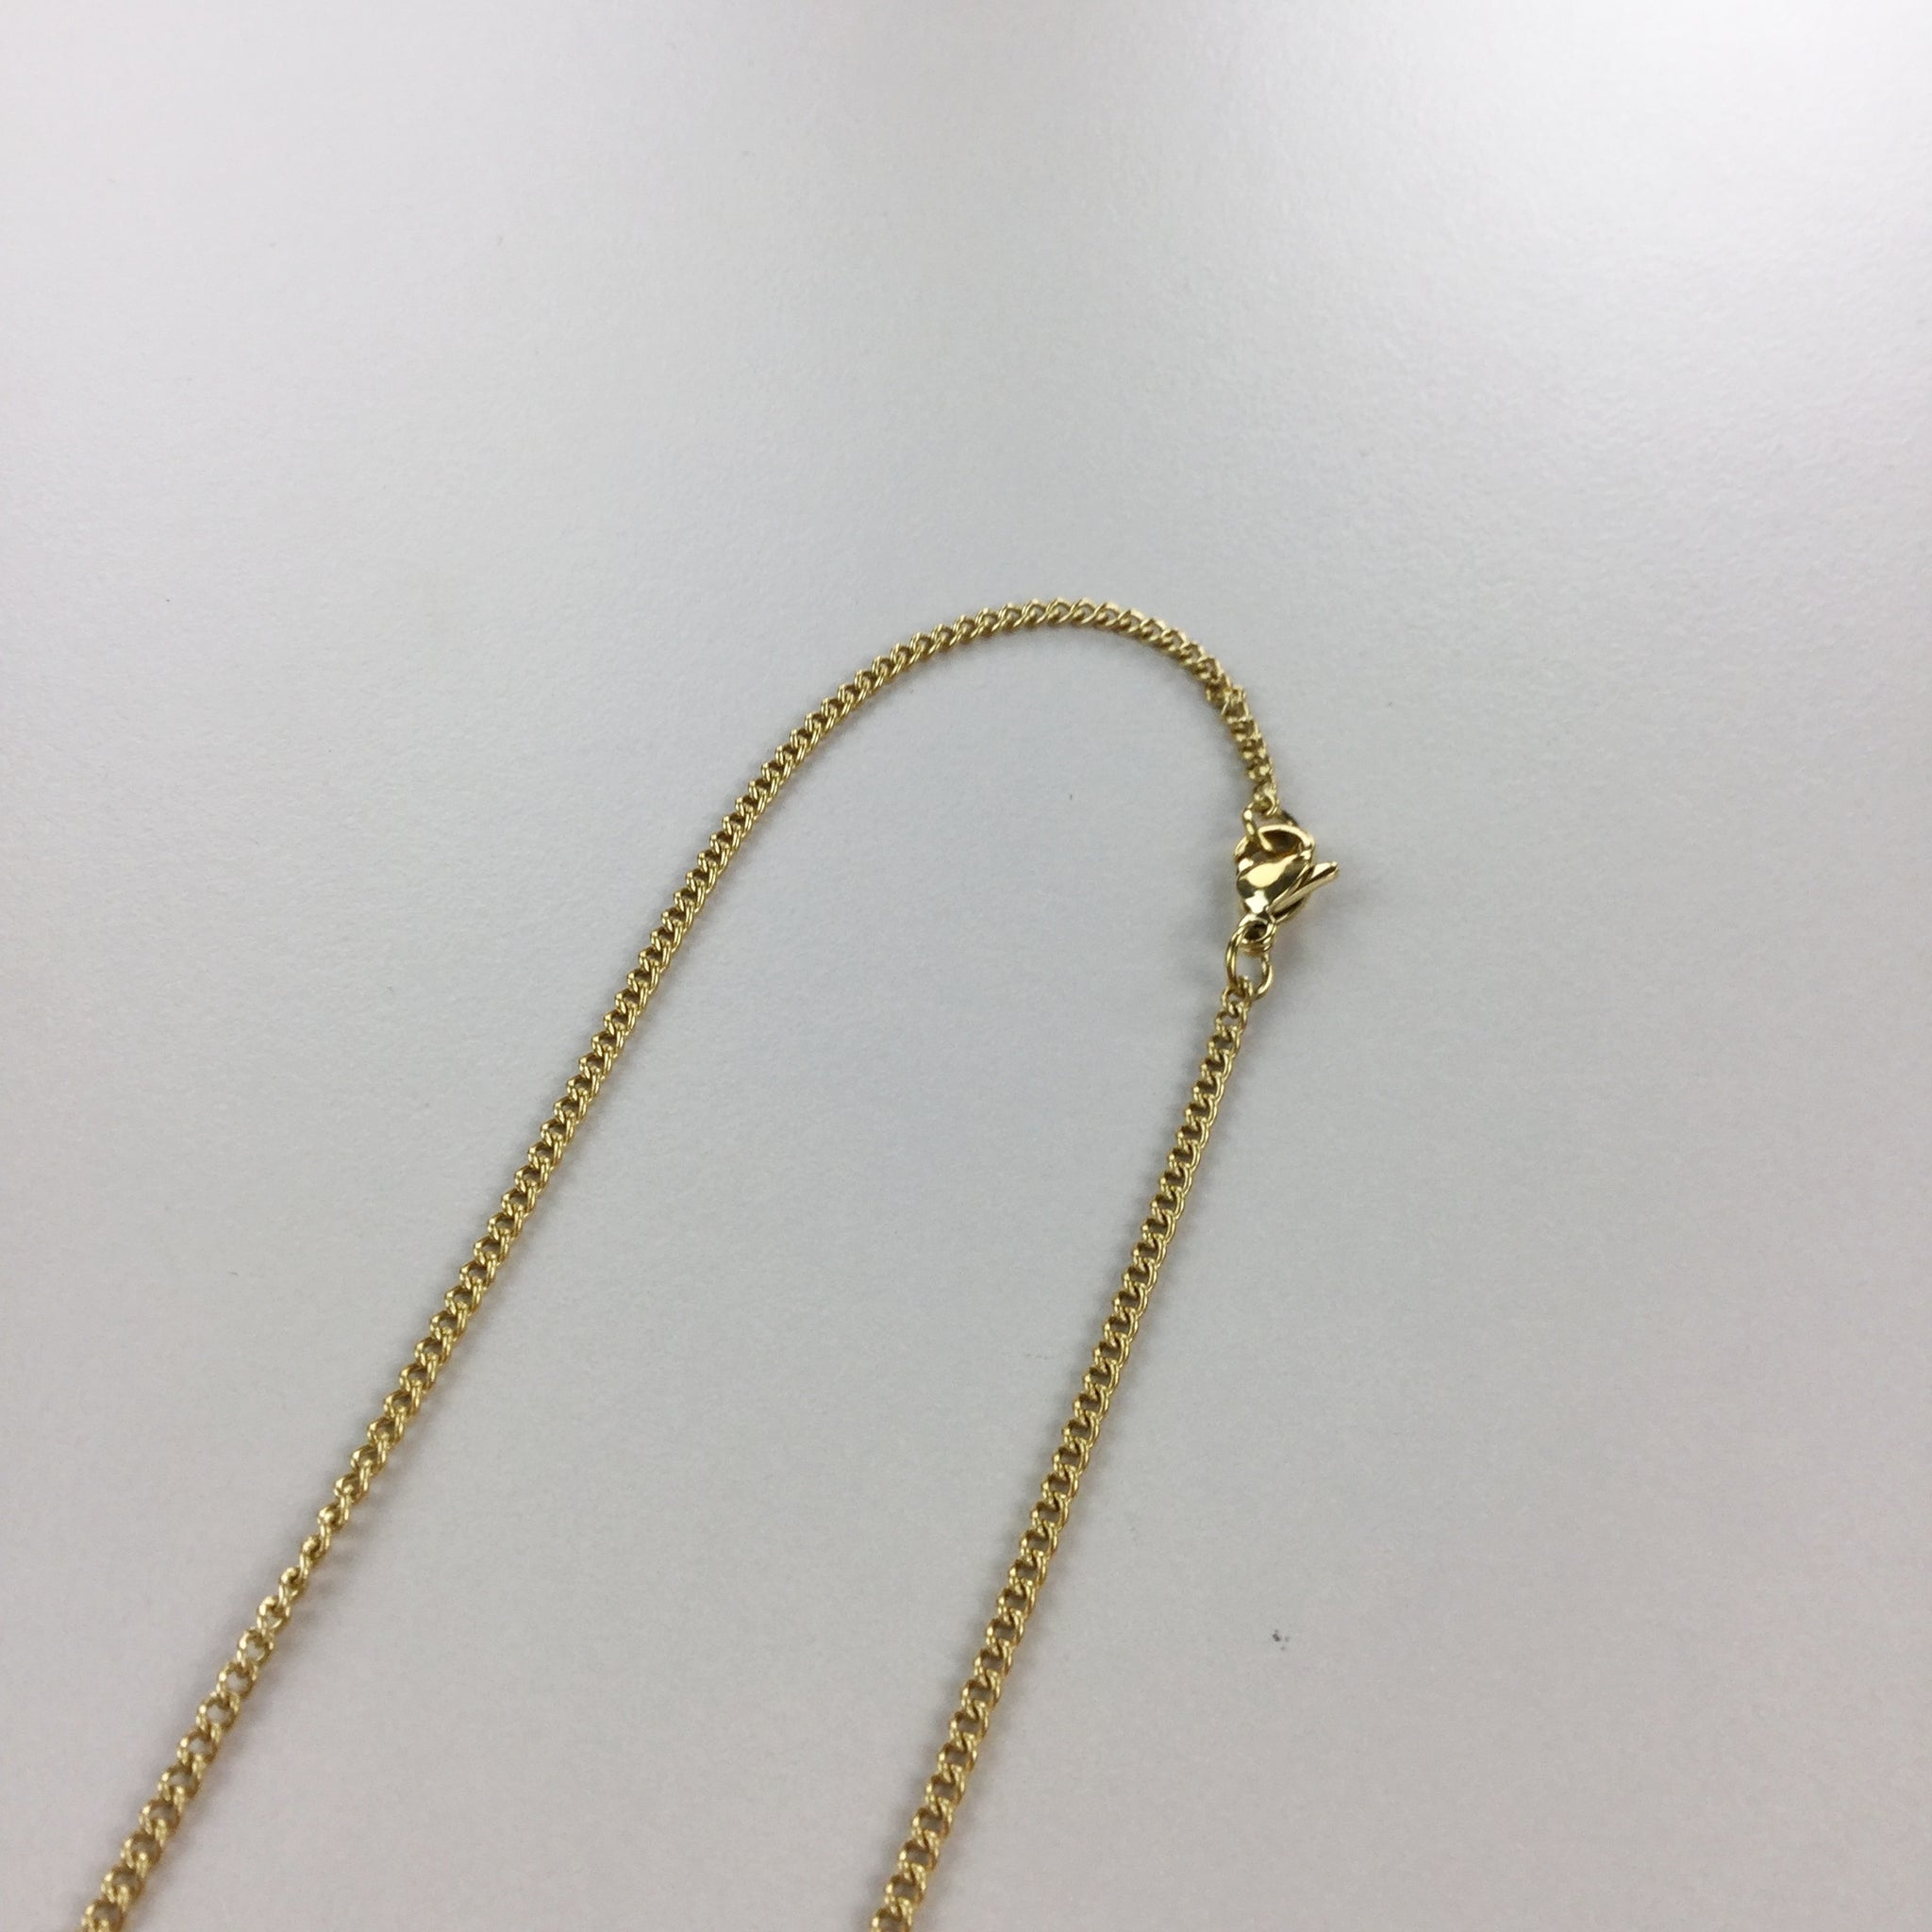 Nike swoosh necklace, gold and silver, slavonic chain, vintage Nike, unisex  necklace